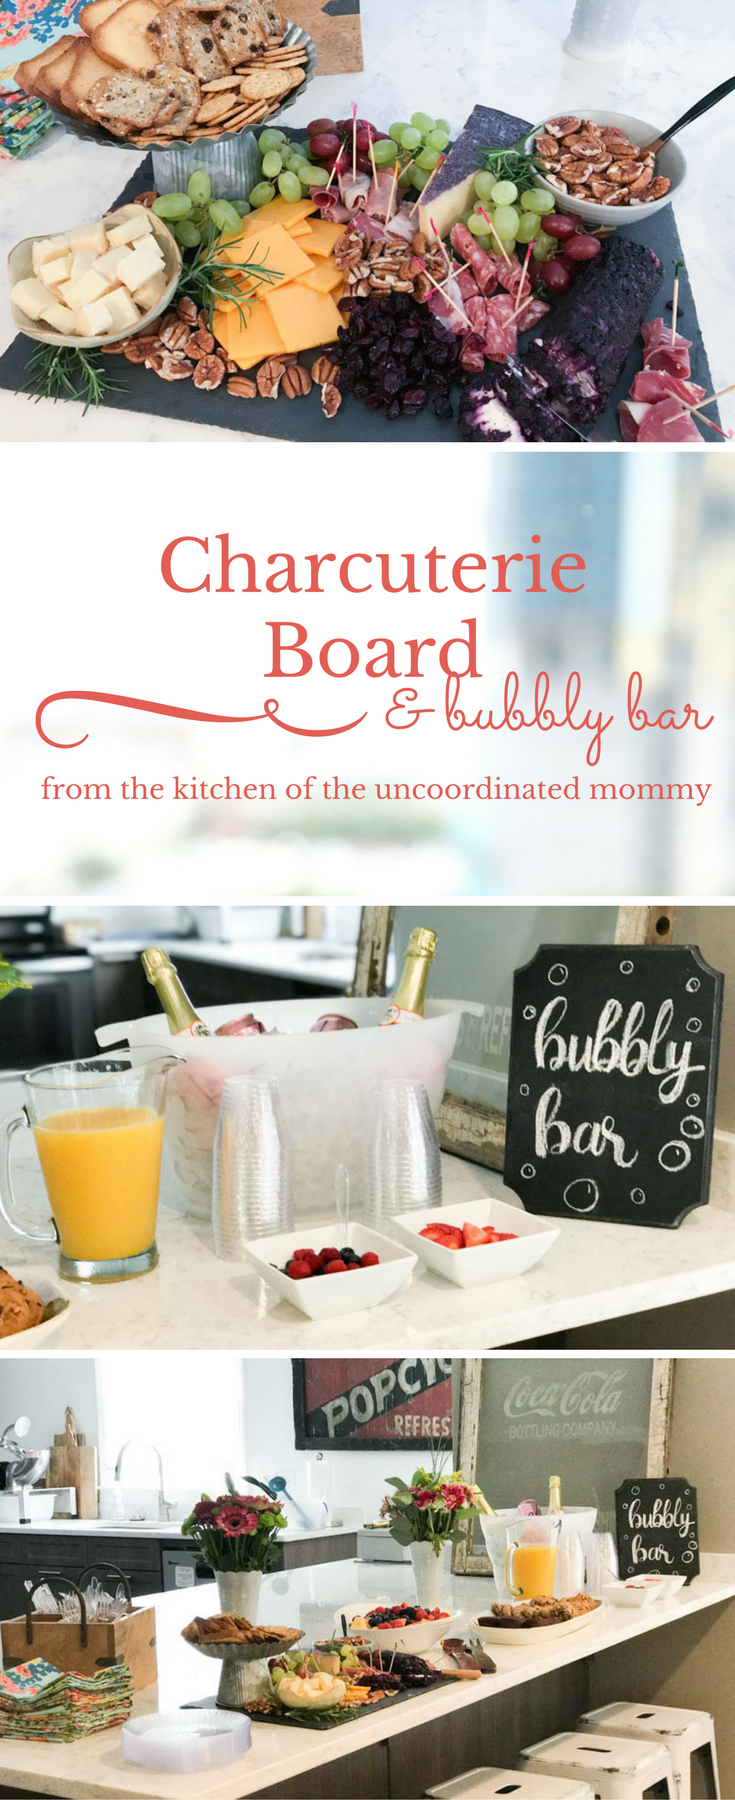 This charcuterie board and champagne bubbly bar a quick and easy option for party food!